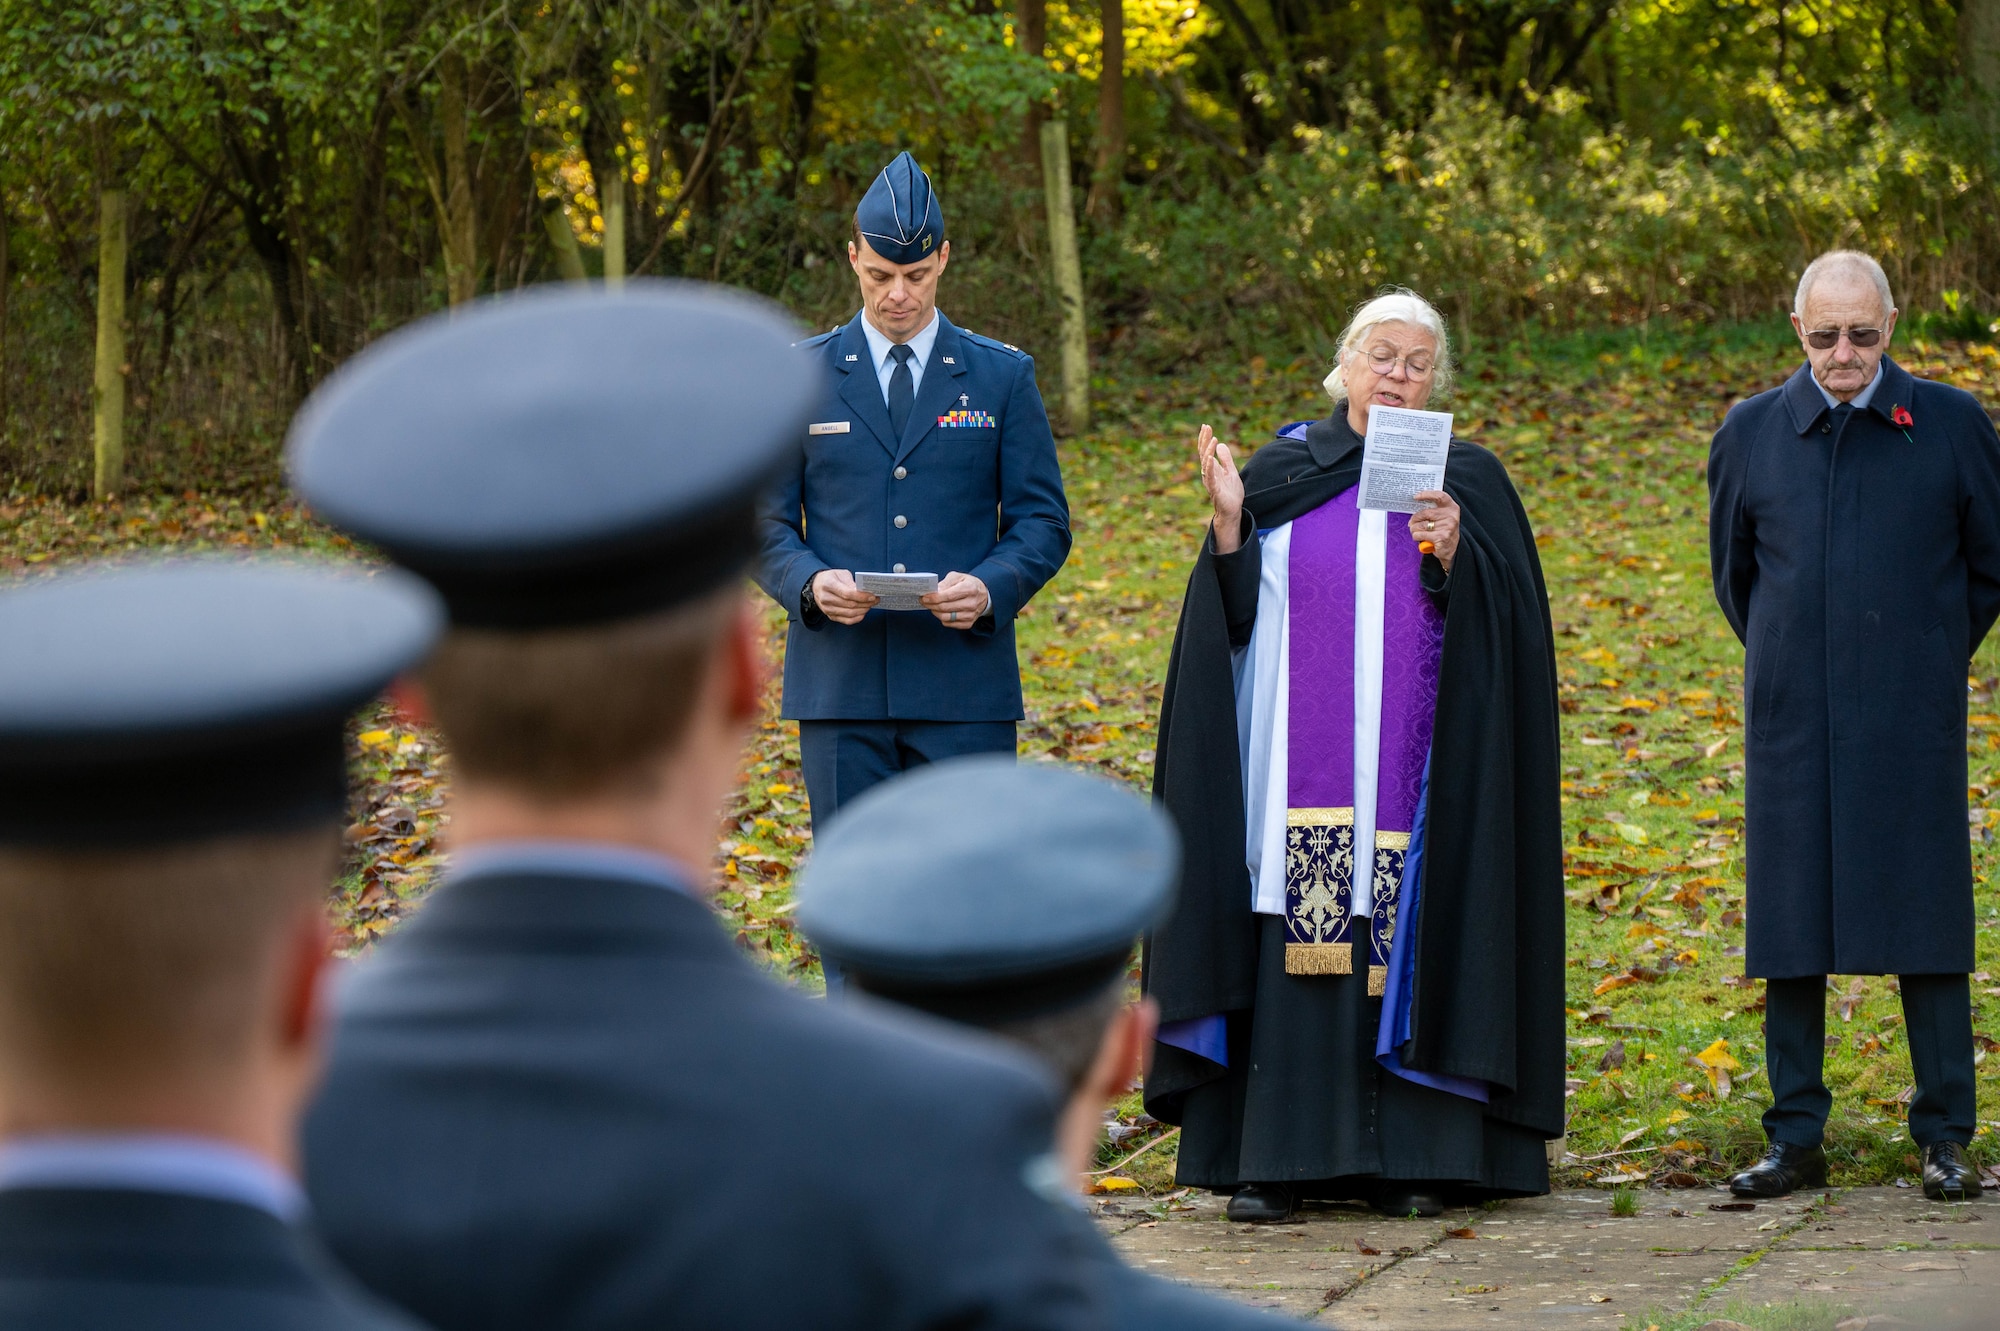 Religious members speak during a Remembrance Day ceremony.